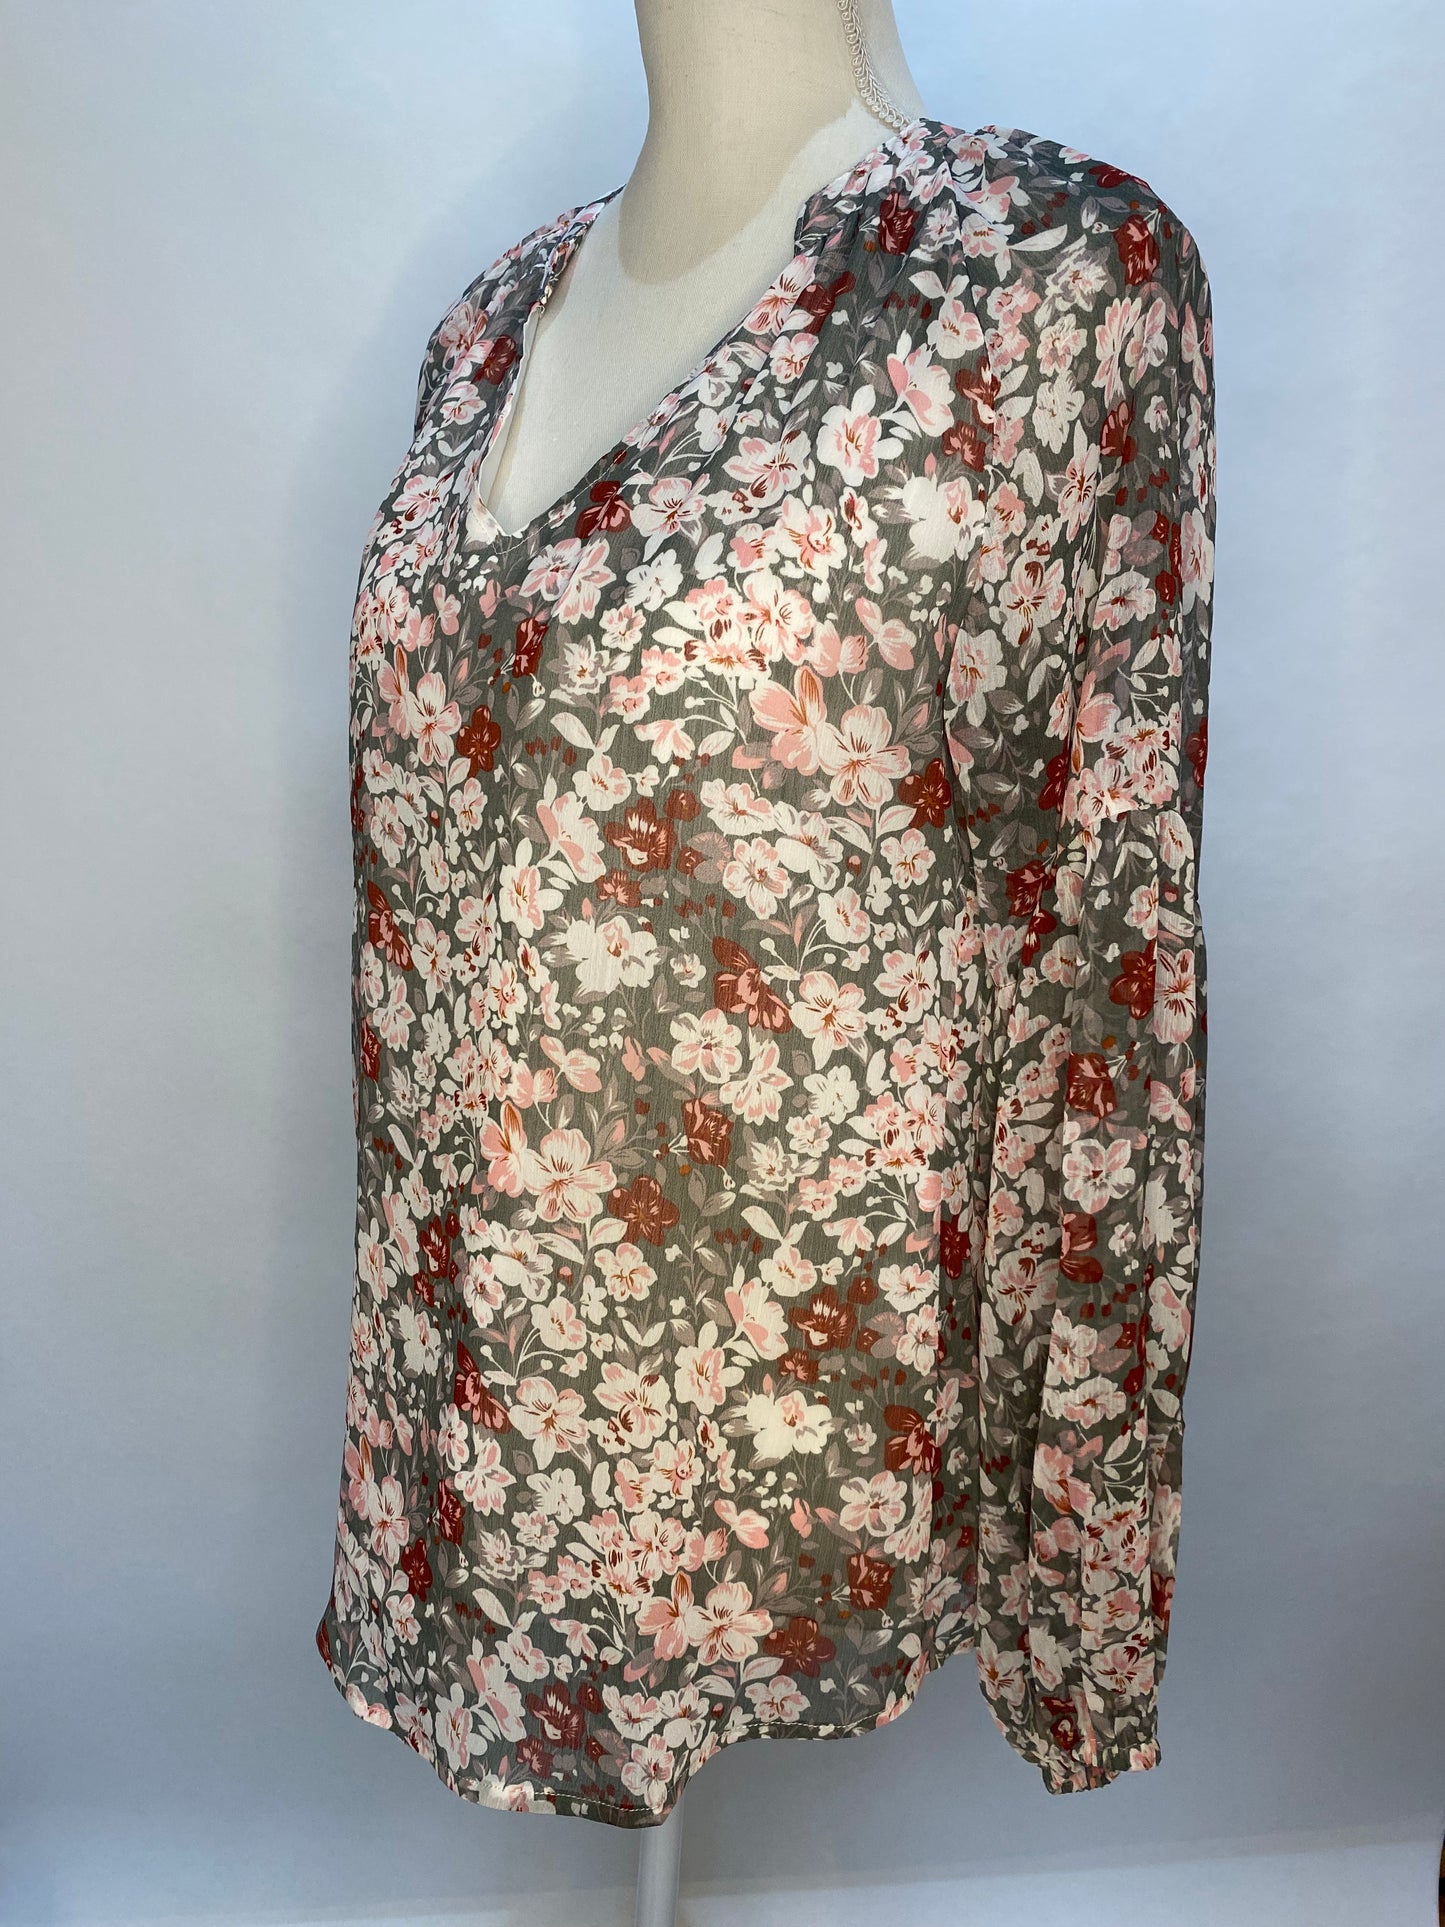 The Blossom Floral Print Top